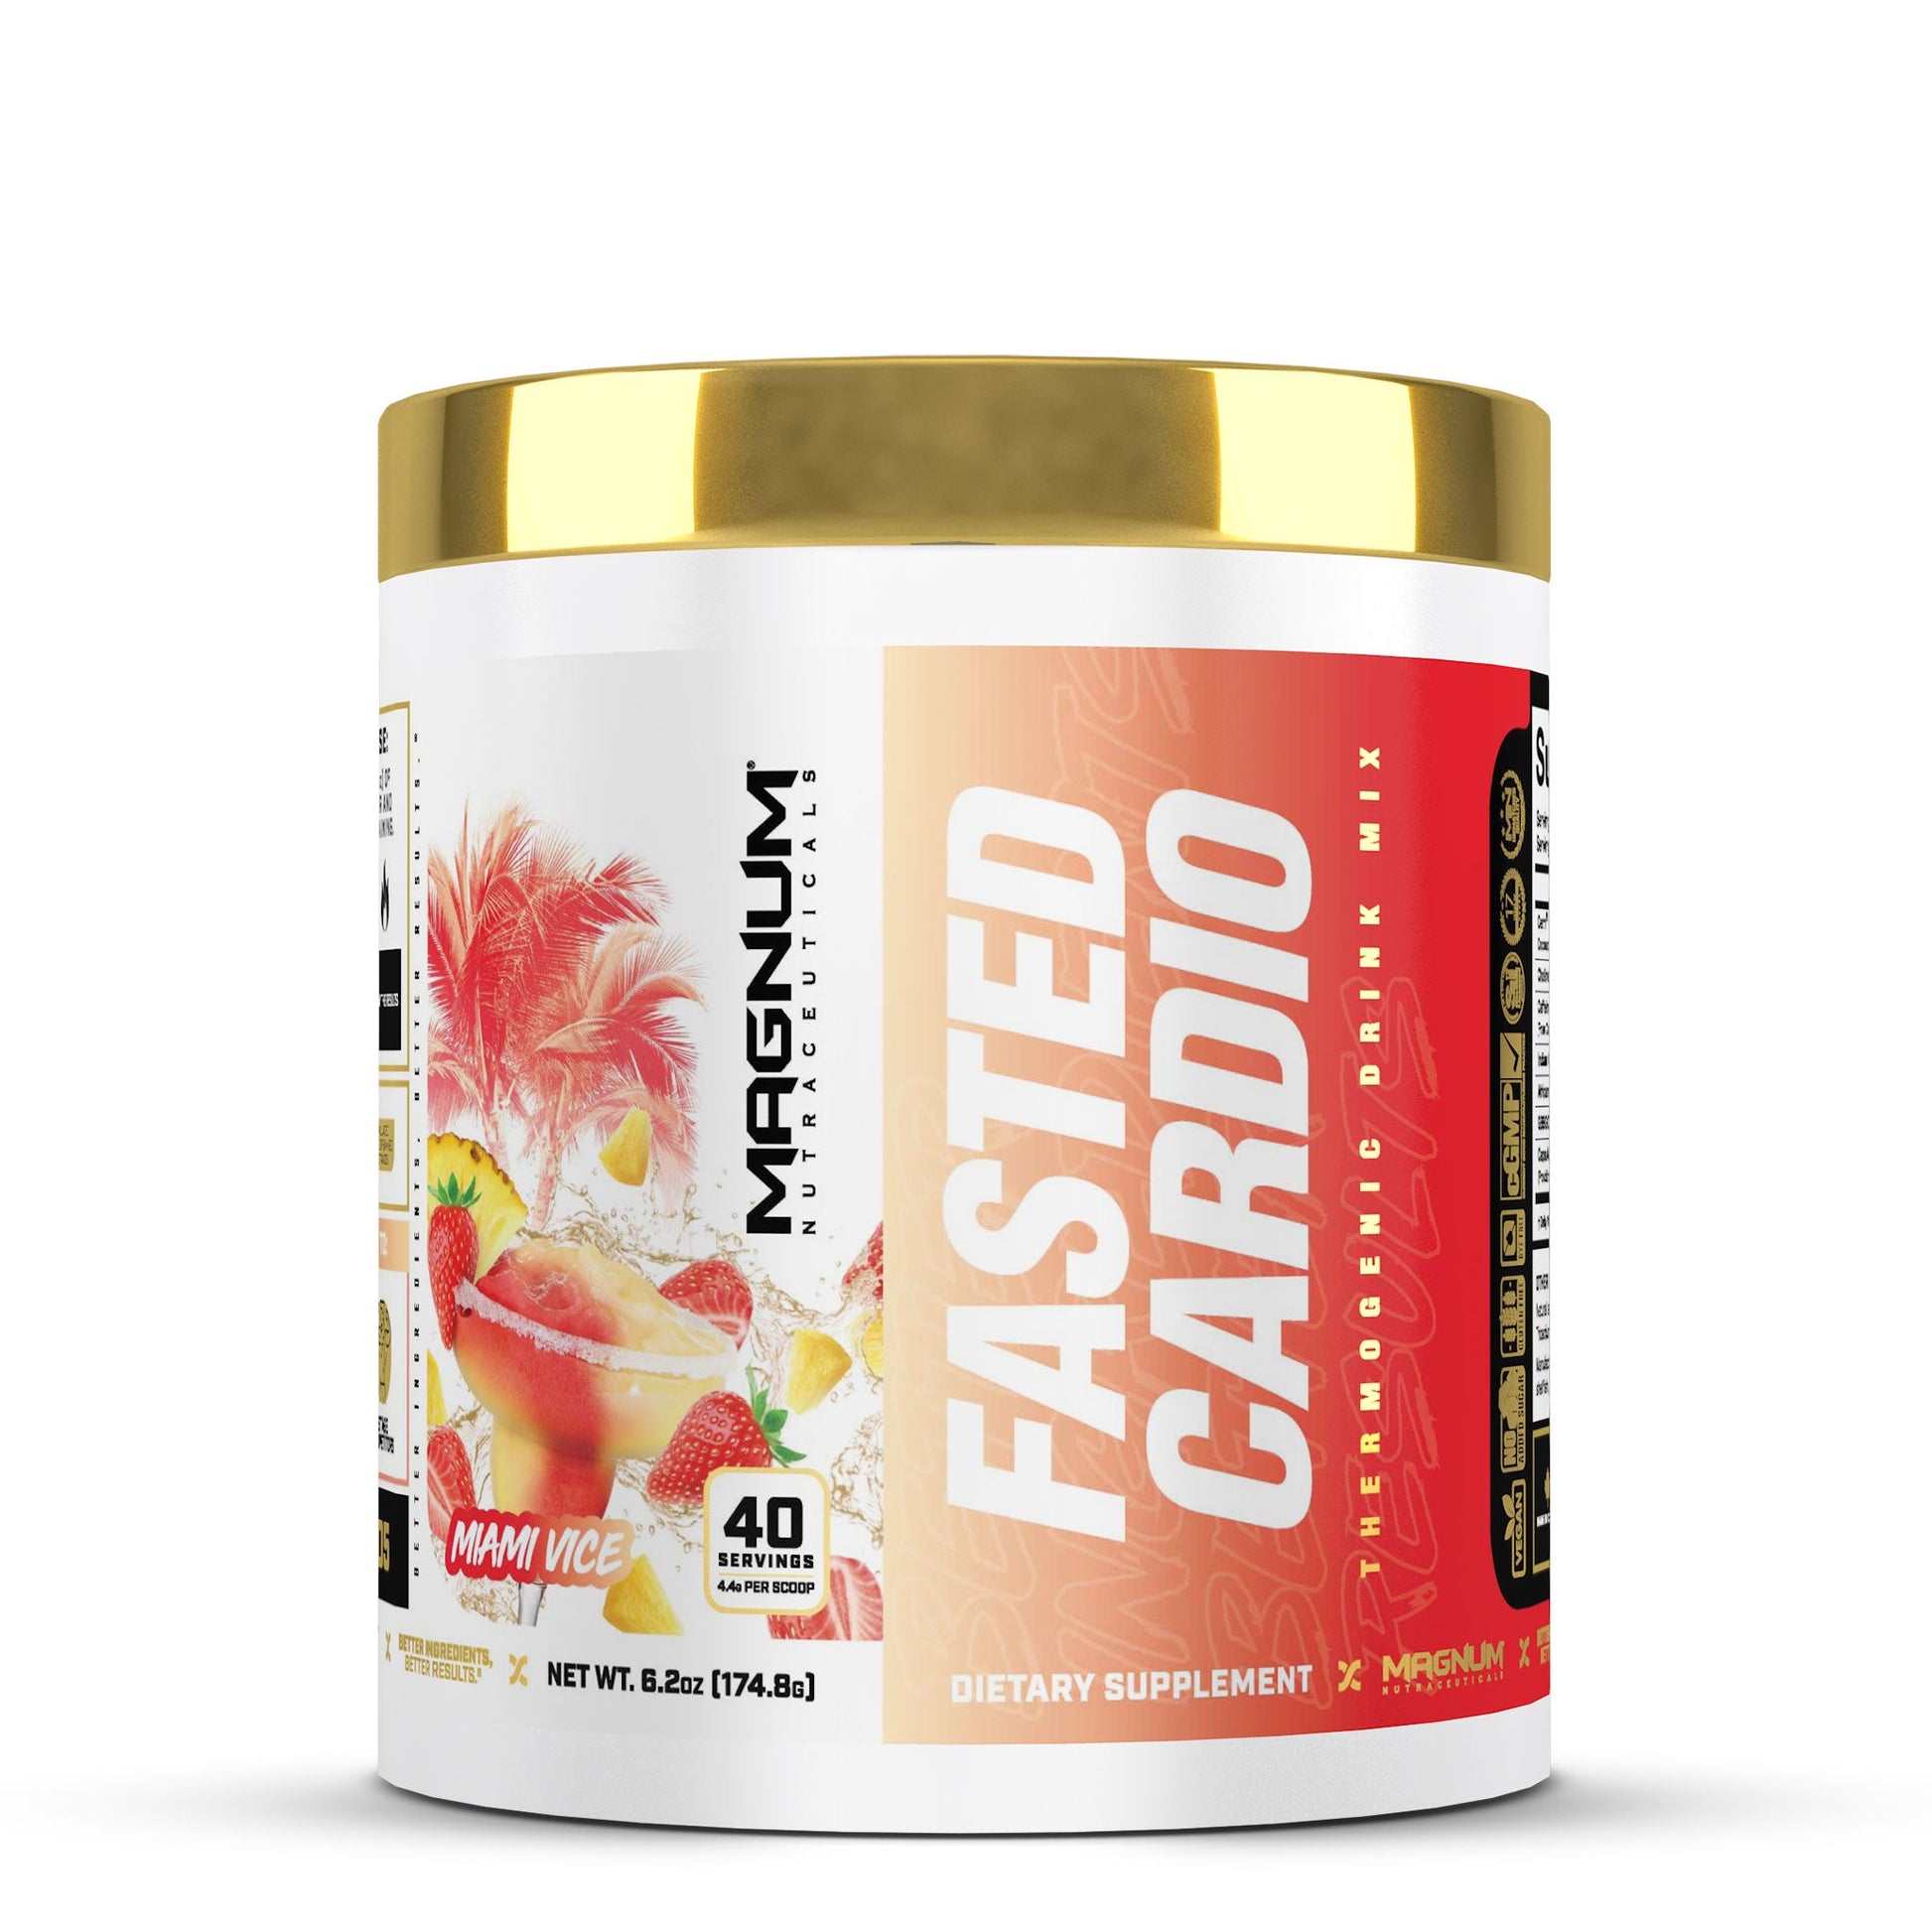 Fasted Cardio, Thermogenic Drink Mix, Miami Vice flavor, 40 servings